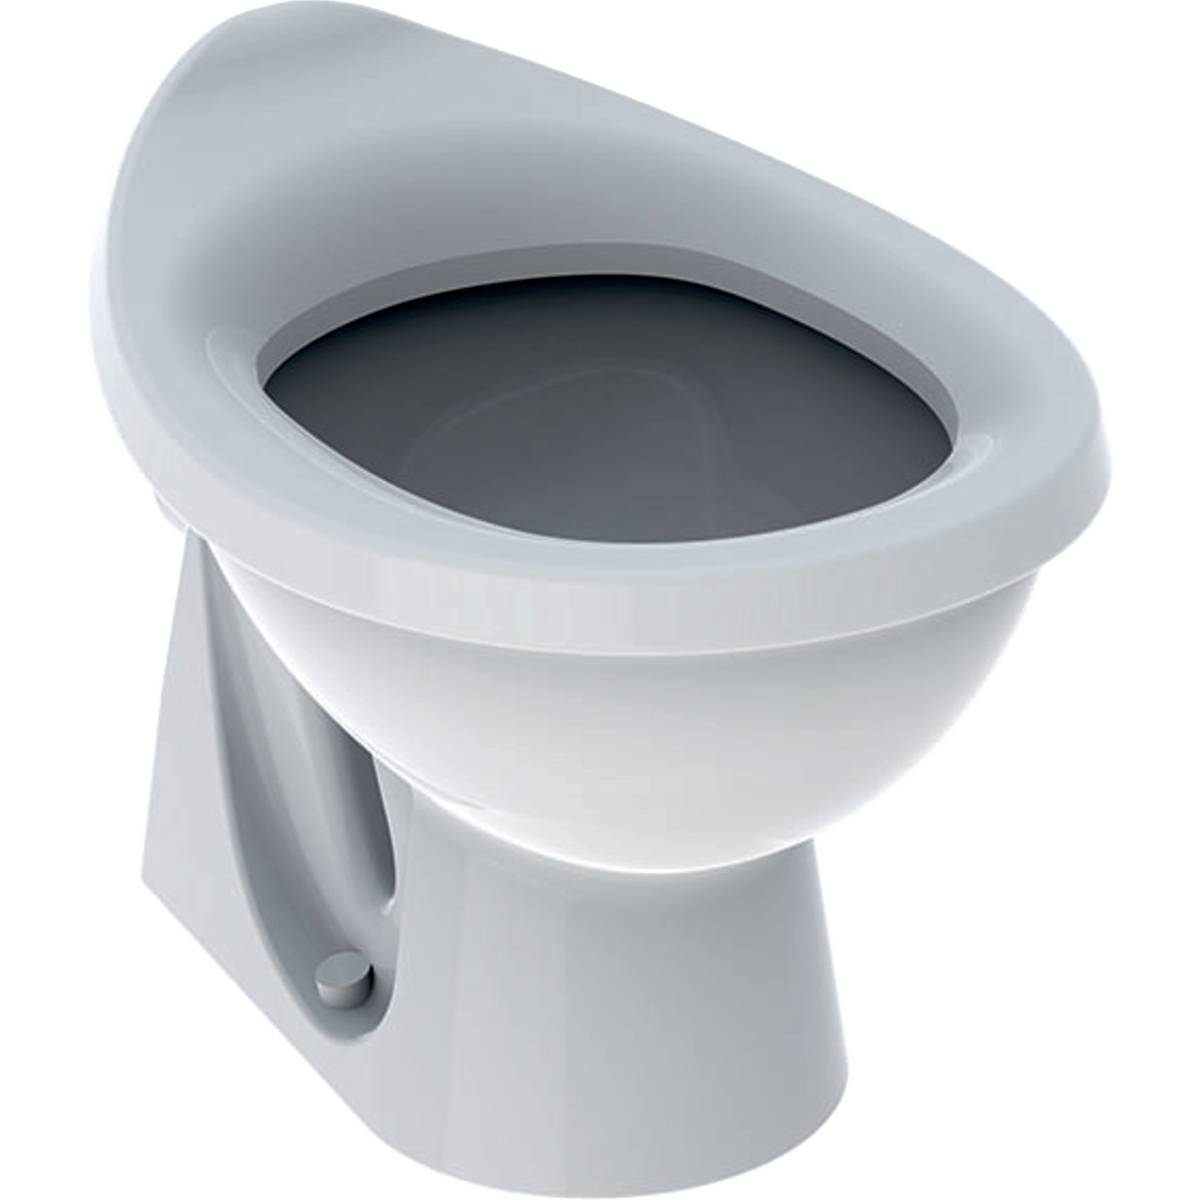 Bambini Floor-Standing WC For Babies And Small Children, Washdown